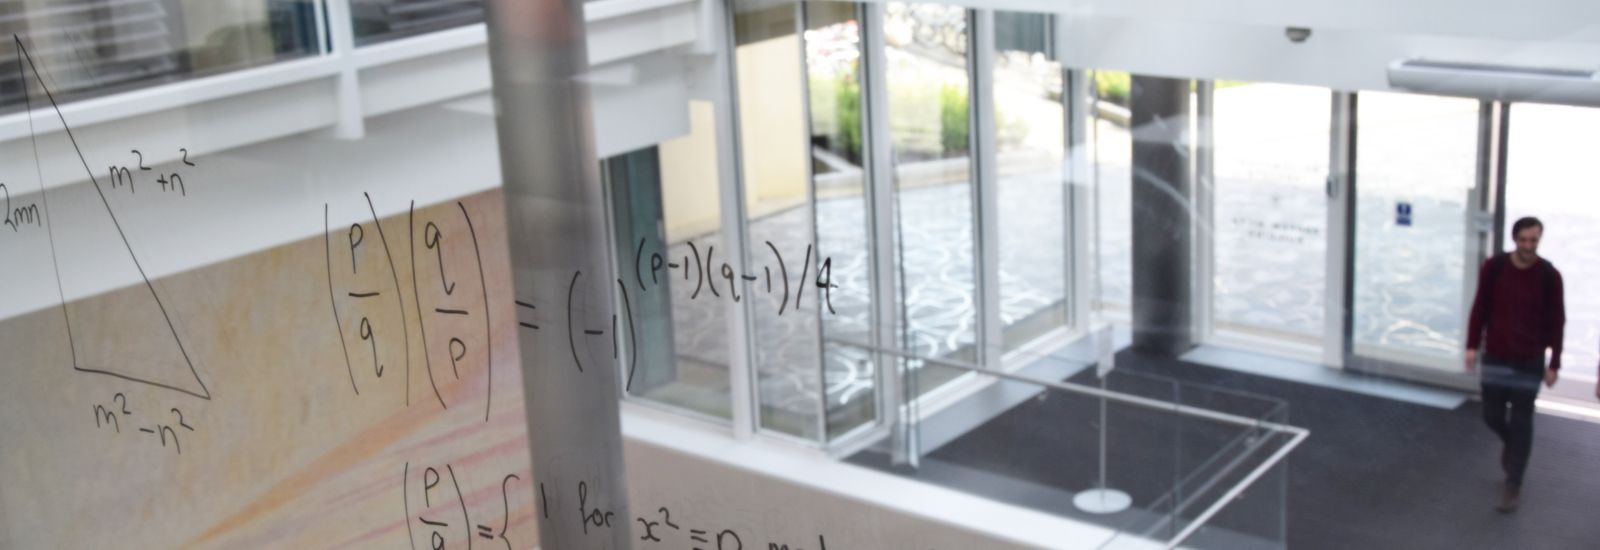 Equations written on glass looking over the entrance to the Mathematical Institute